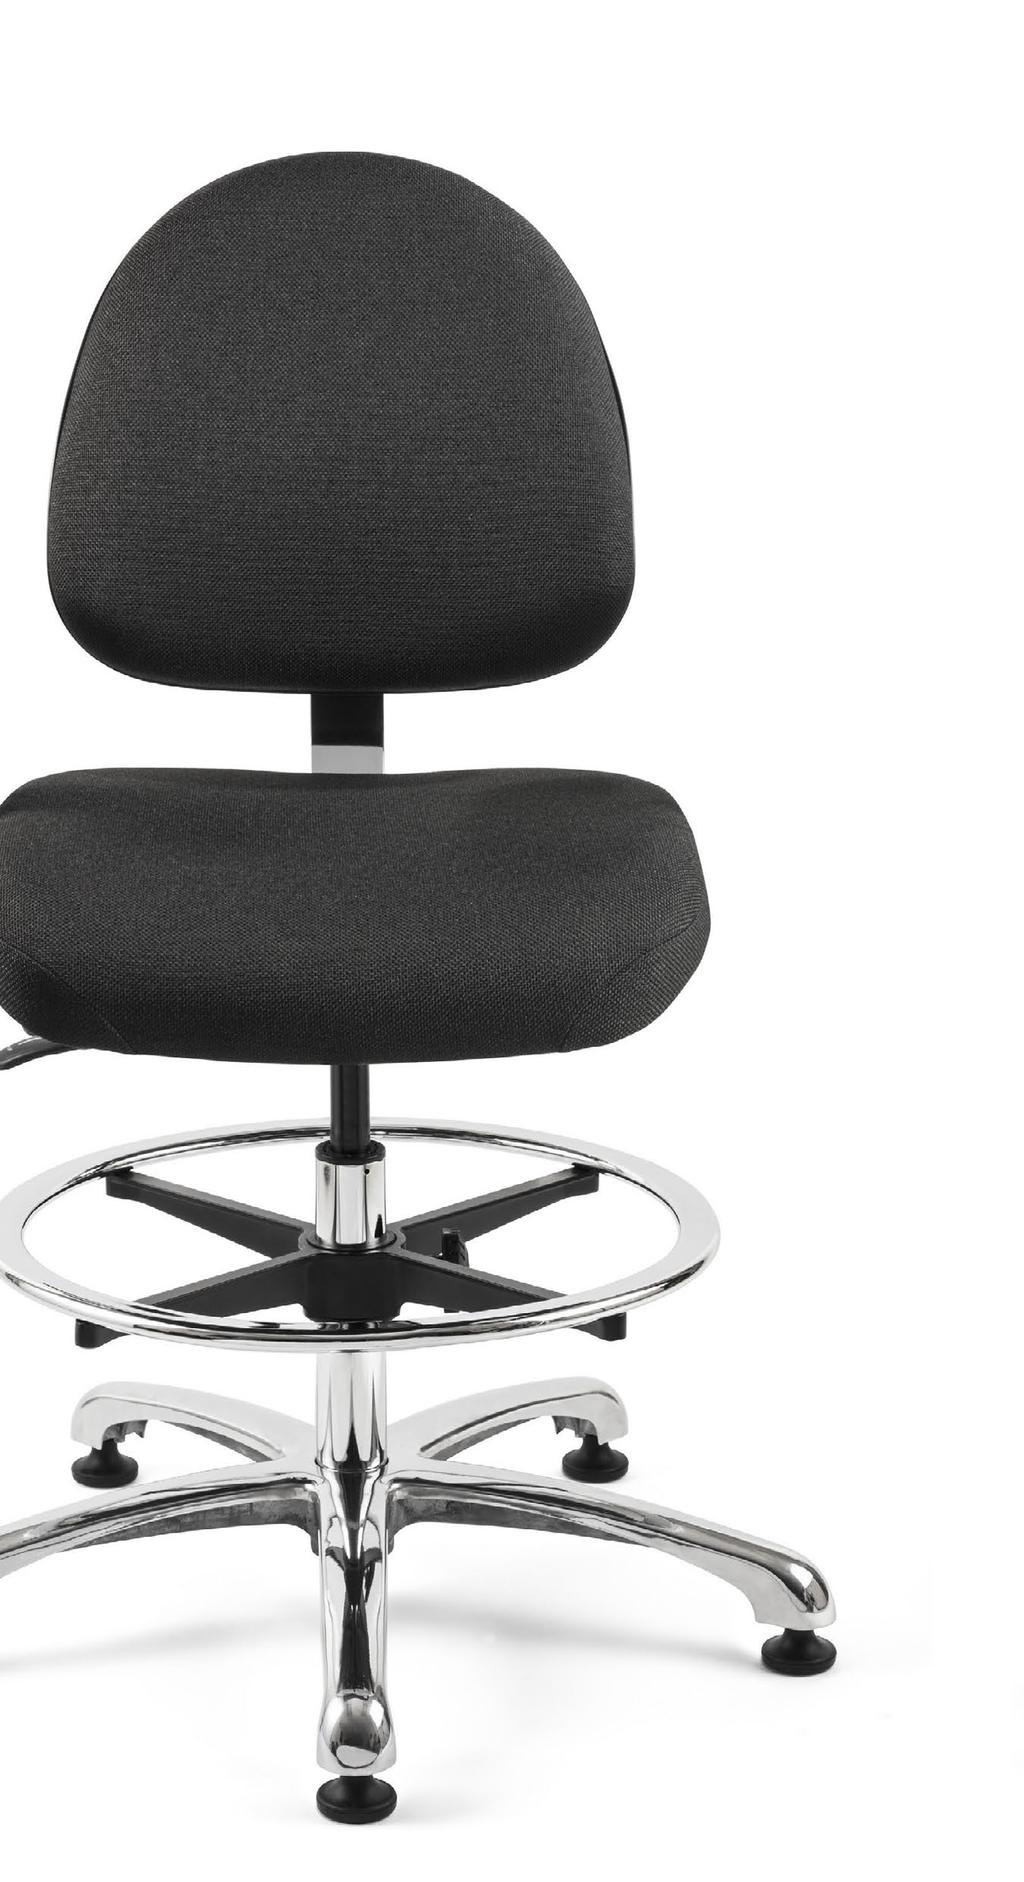 UPHOLSTERED CHAIRS 6000/9000 Series INTEGRA SERIES BEVCO s INTEGRA series chairs offer aroundthe-clock reliability for a variety of workplace environments.